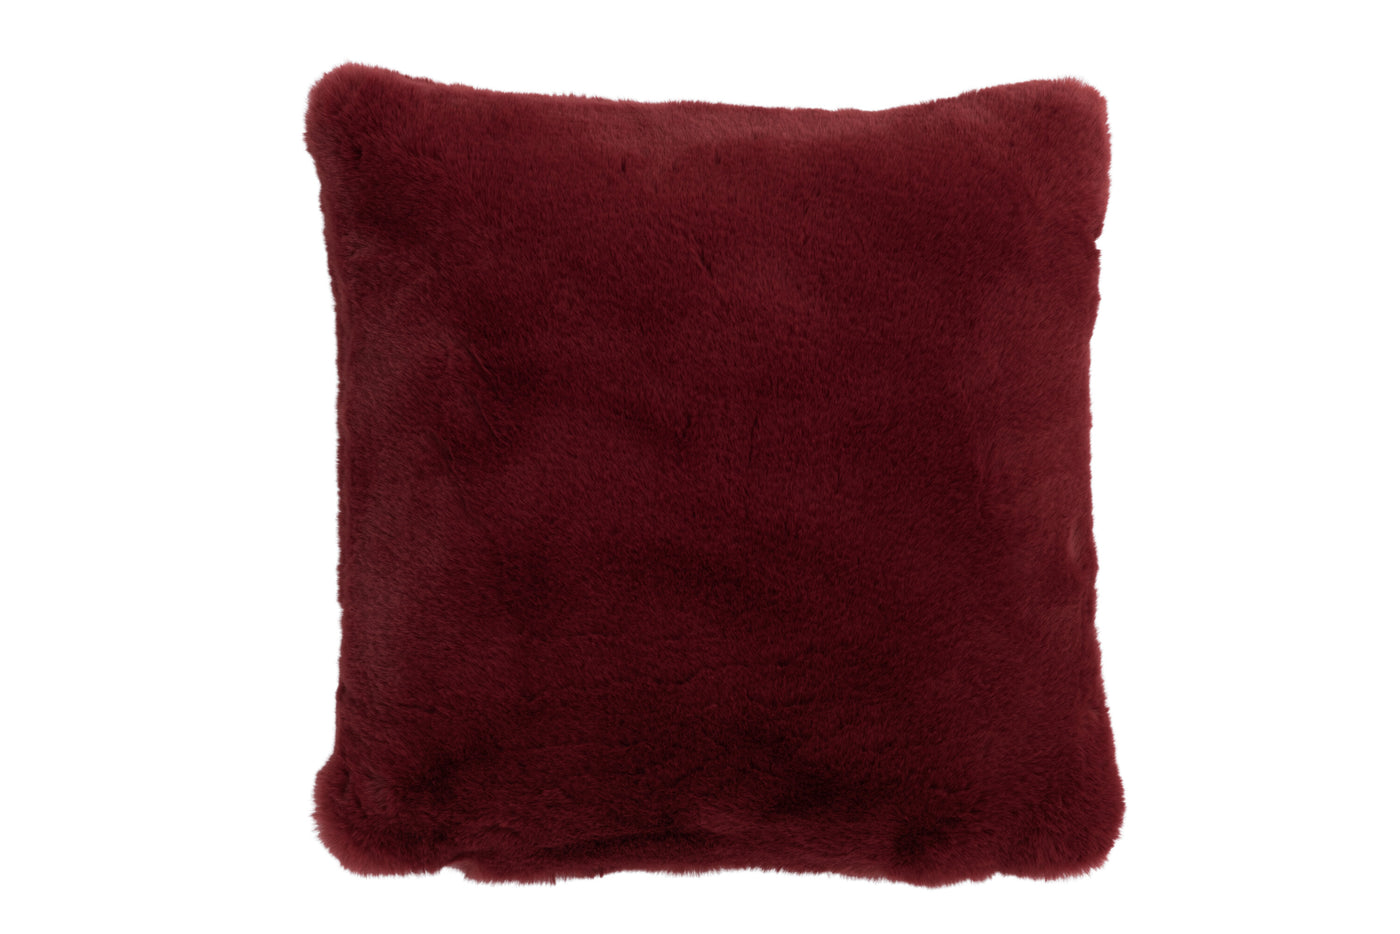 CUSHION CUTIE POLYESTER BORDEAUX RED